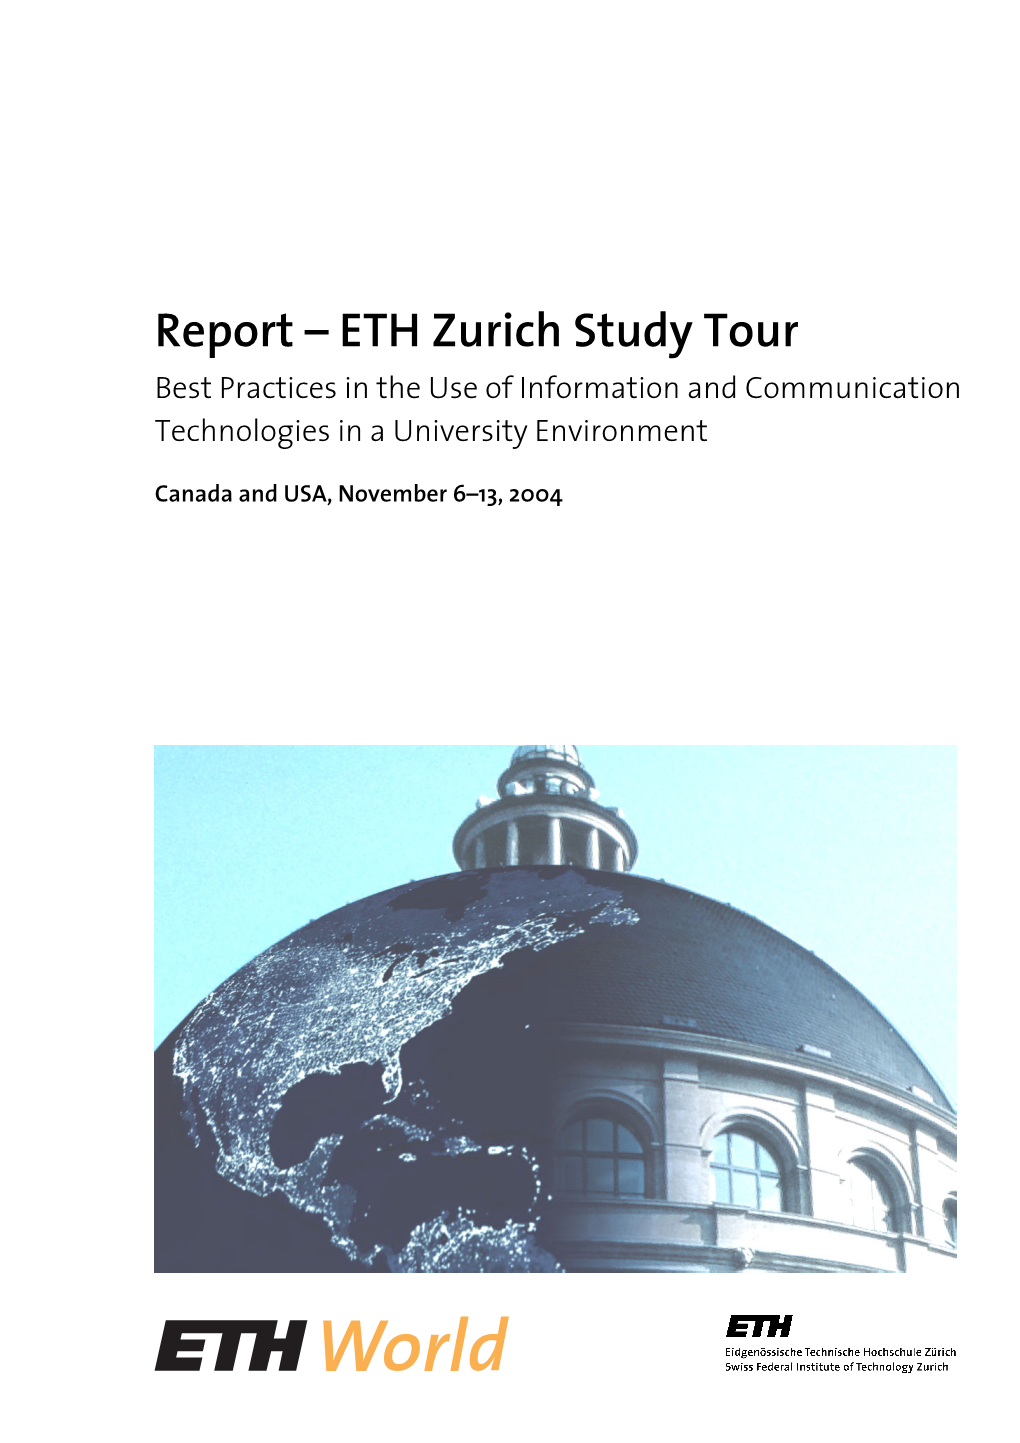 Report – ETH Zurich Study Tour Best Practices in the Use of Information and Communication Technologies in a University Environment